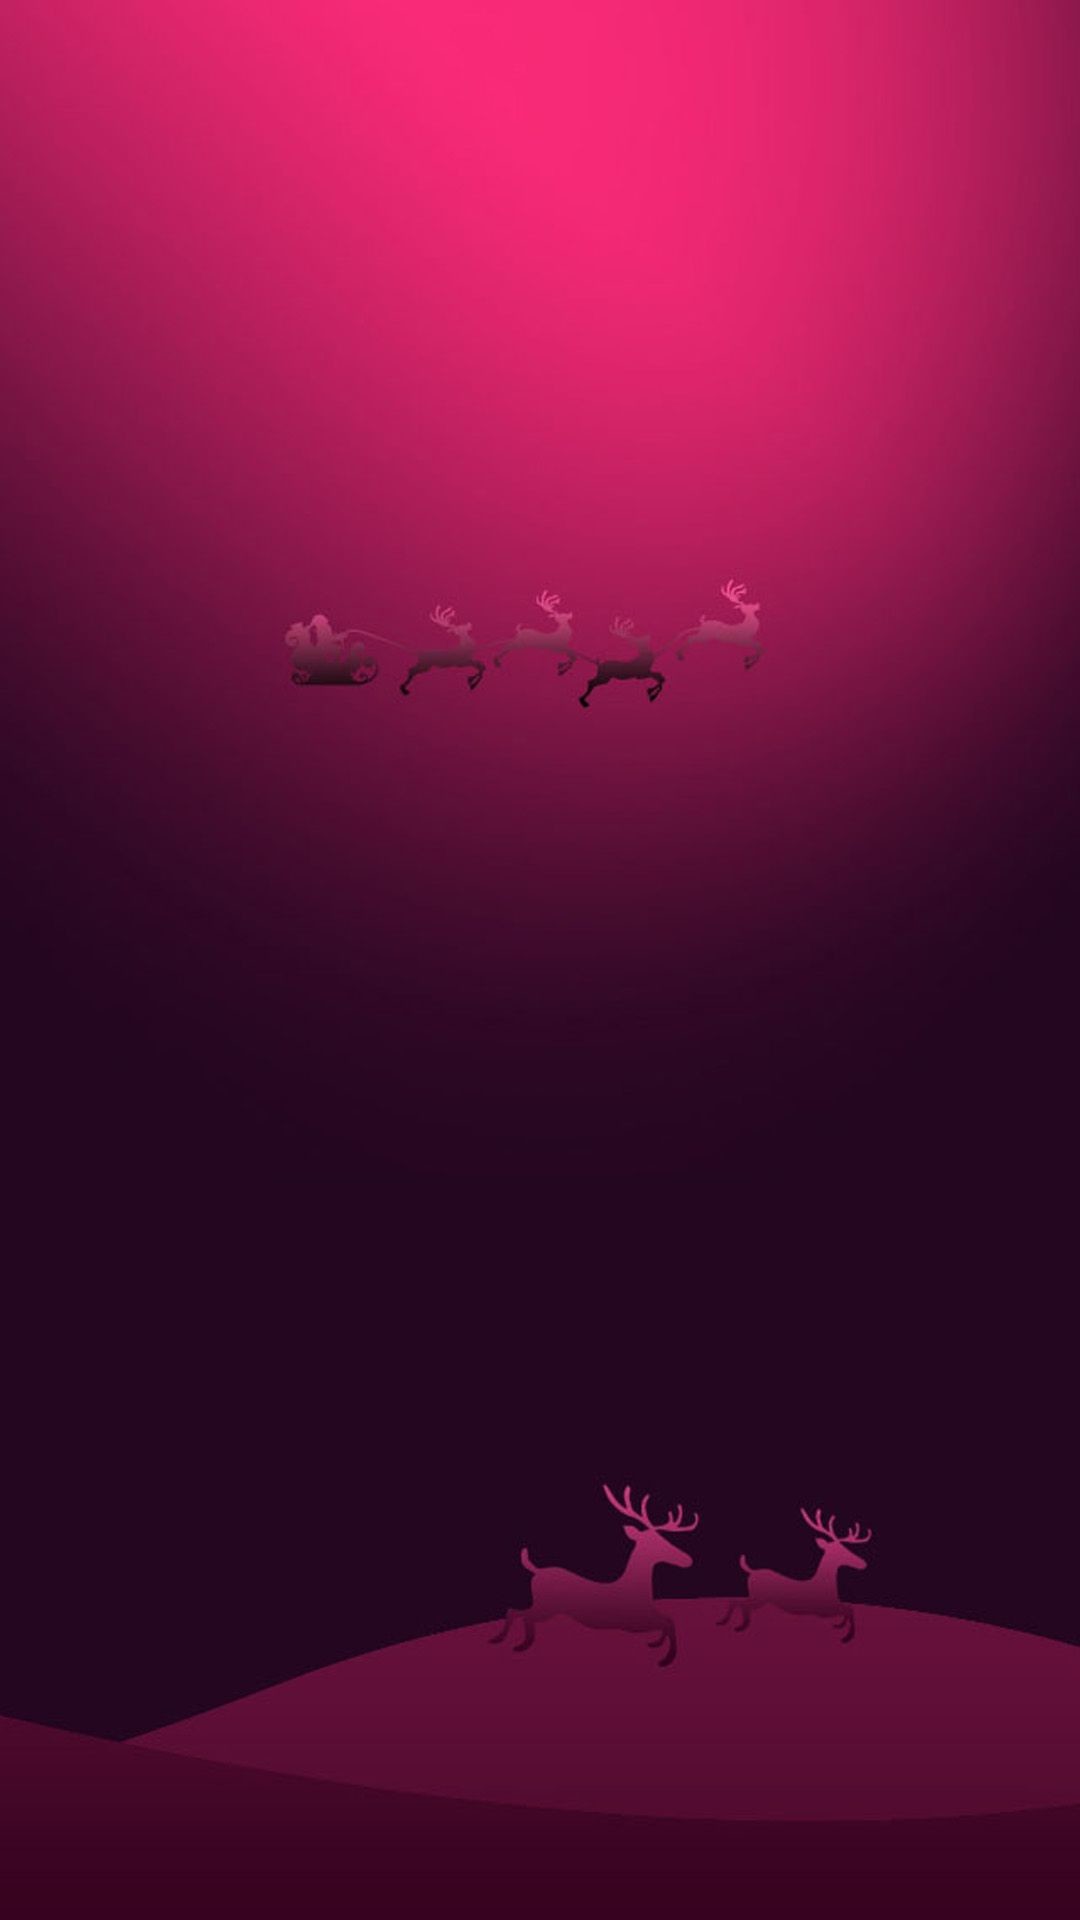 1080x1920 LG G3 Wallpapers HD 48 Shy Android 